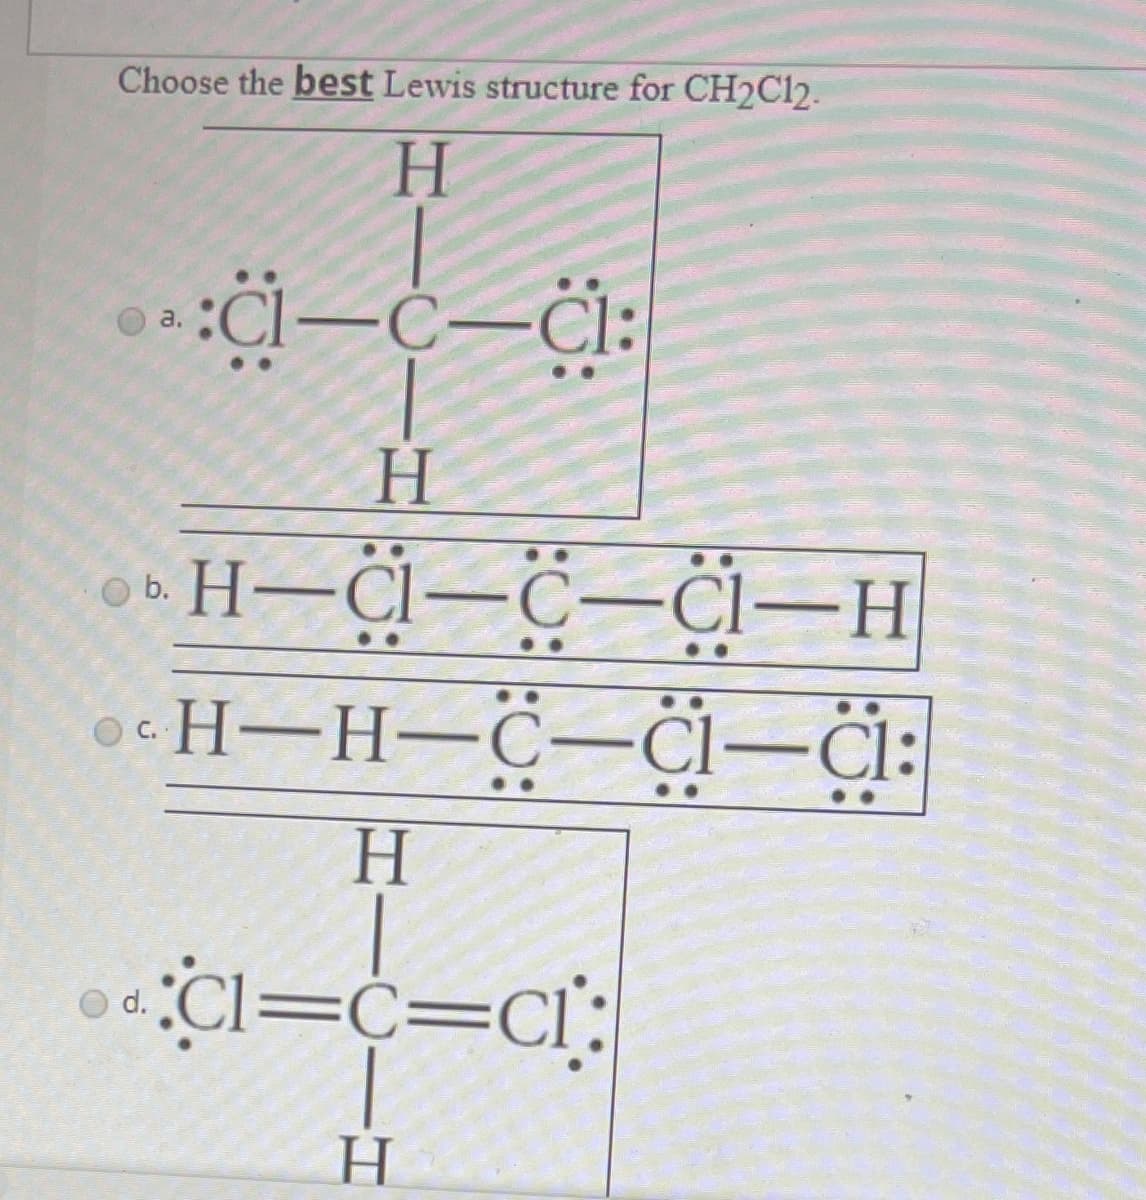 Choose the best Lewis structure for CH2C12.
H.
a.
H.
6. H–Cl–C-Cl-H
H-H-C-Cl-Cl:
H.
Cl=c=Cl:
d.
H
